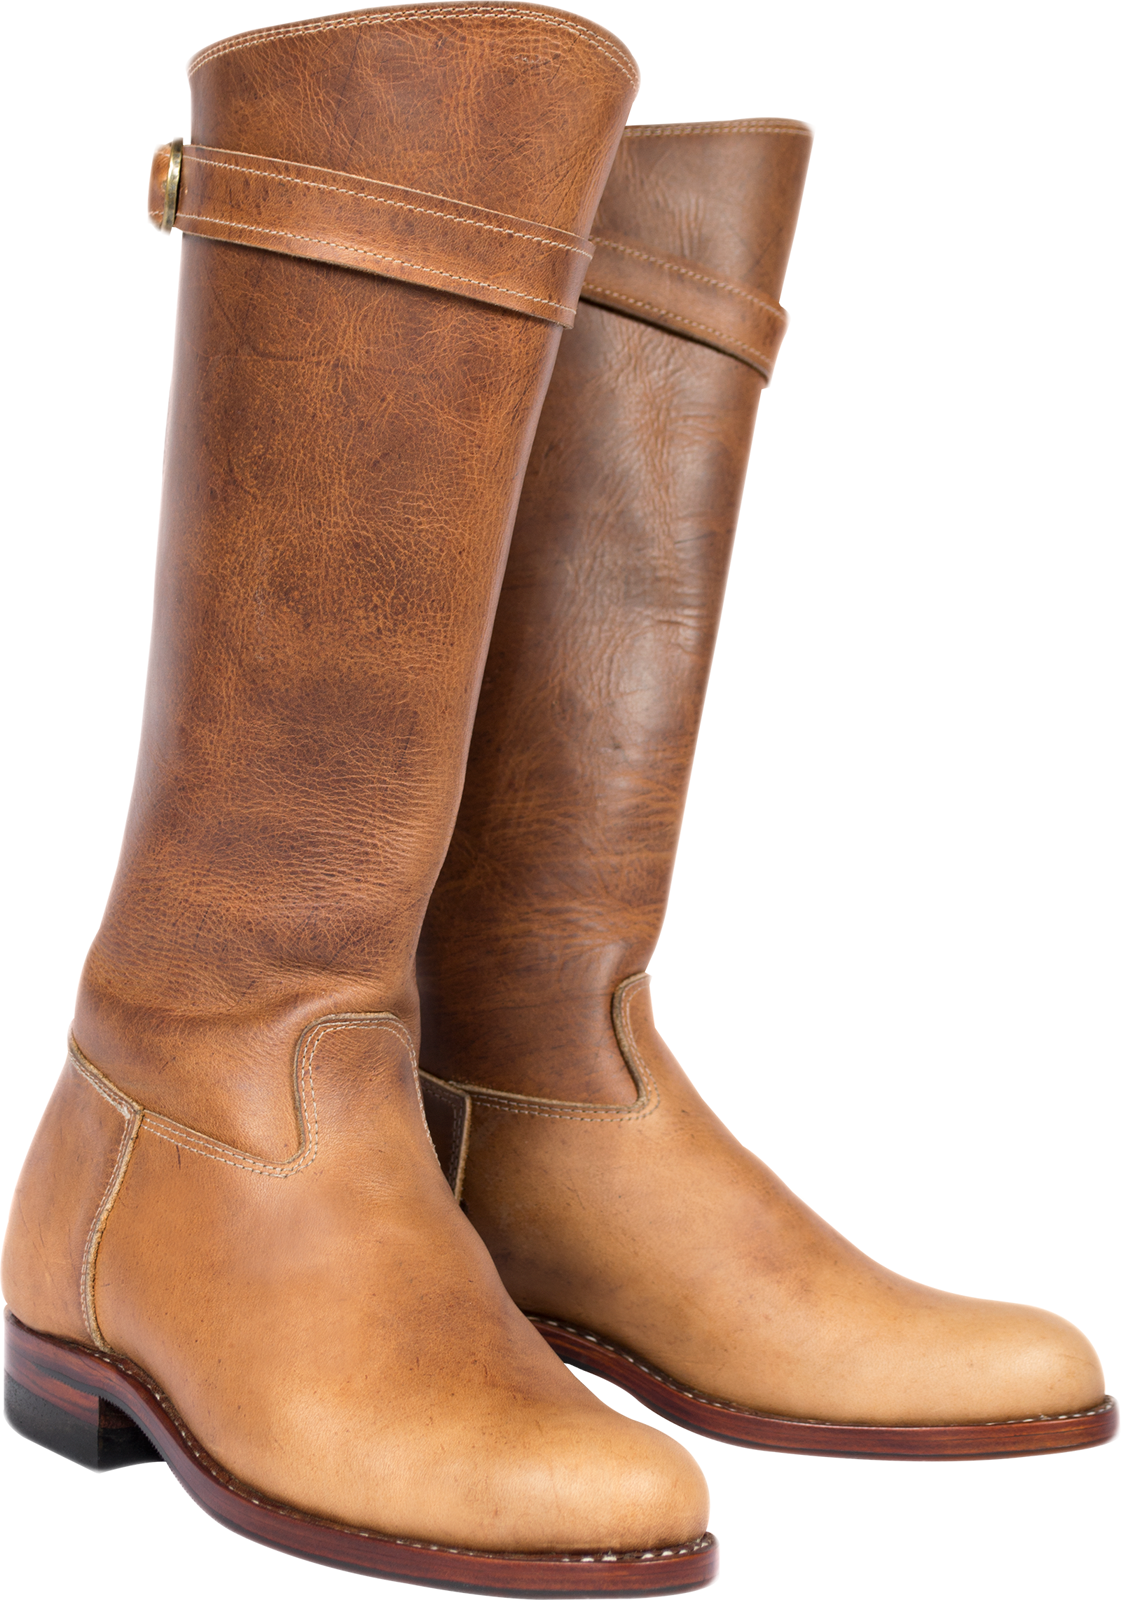 Women's Tall Leather Boots - Atitlan Leather